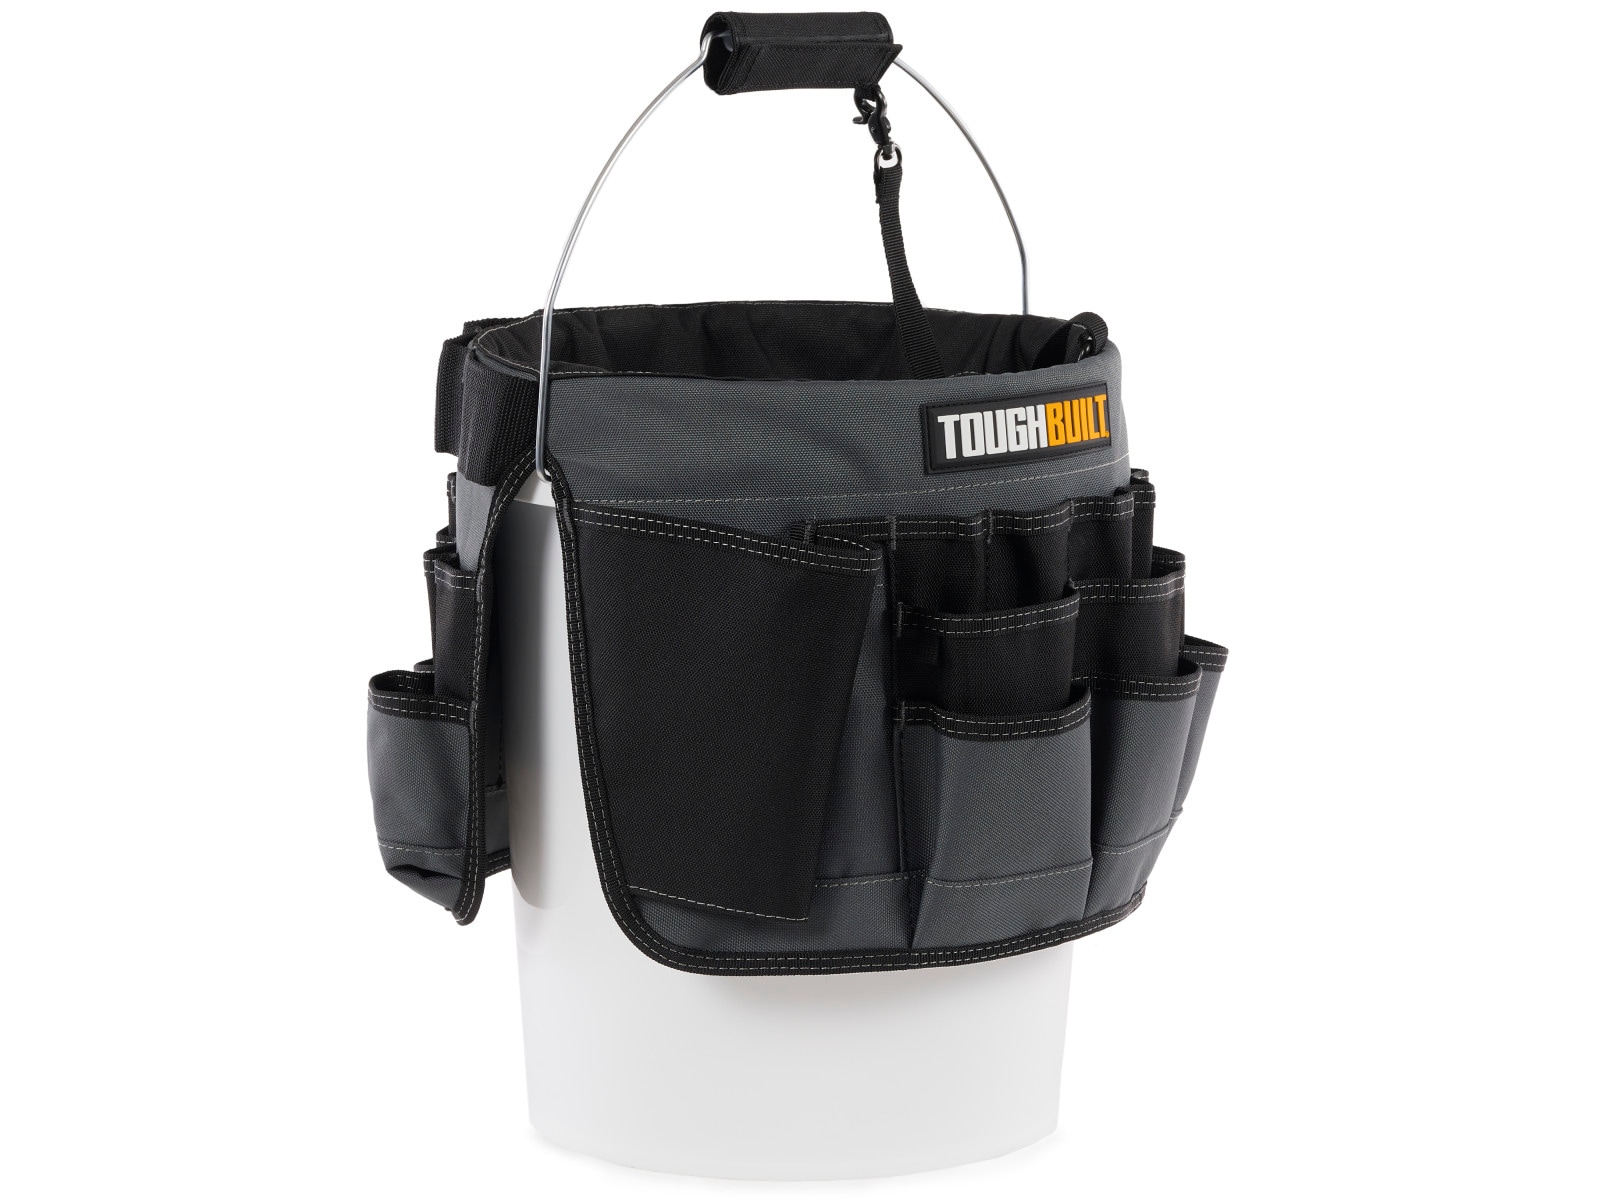 WORKPRO 5 Gallon Bucket Tool Organizer Bucket Boss Workpro Tool Bag With 51  Pockets Fits To 3.5 5 Gallon Bucket Tools Excluded Y200324 From Shanye10,  $19.92